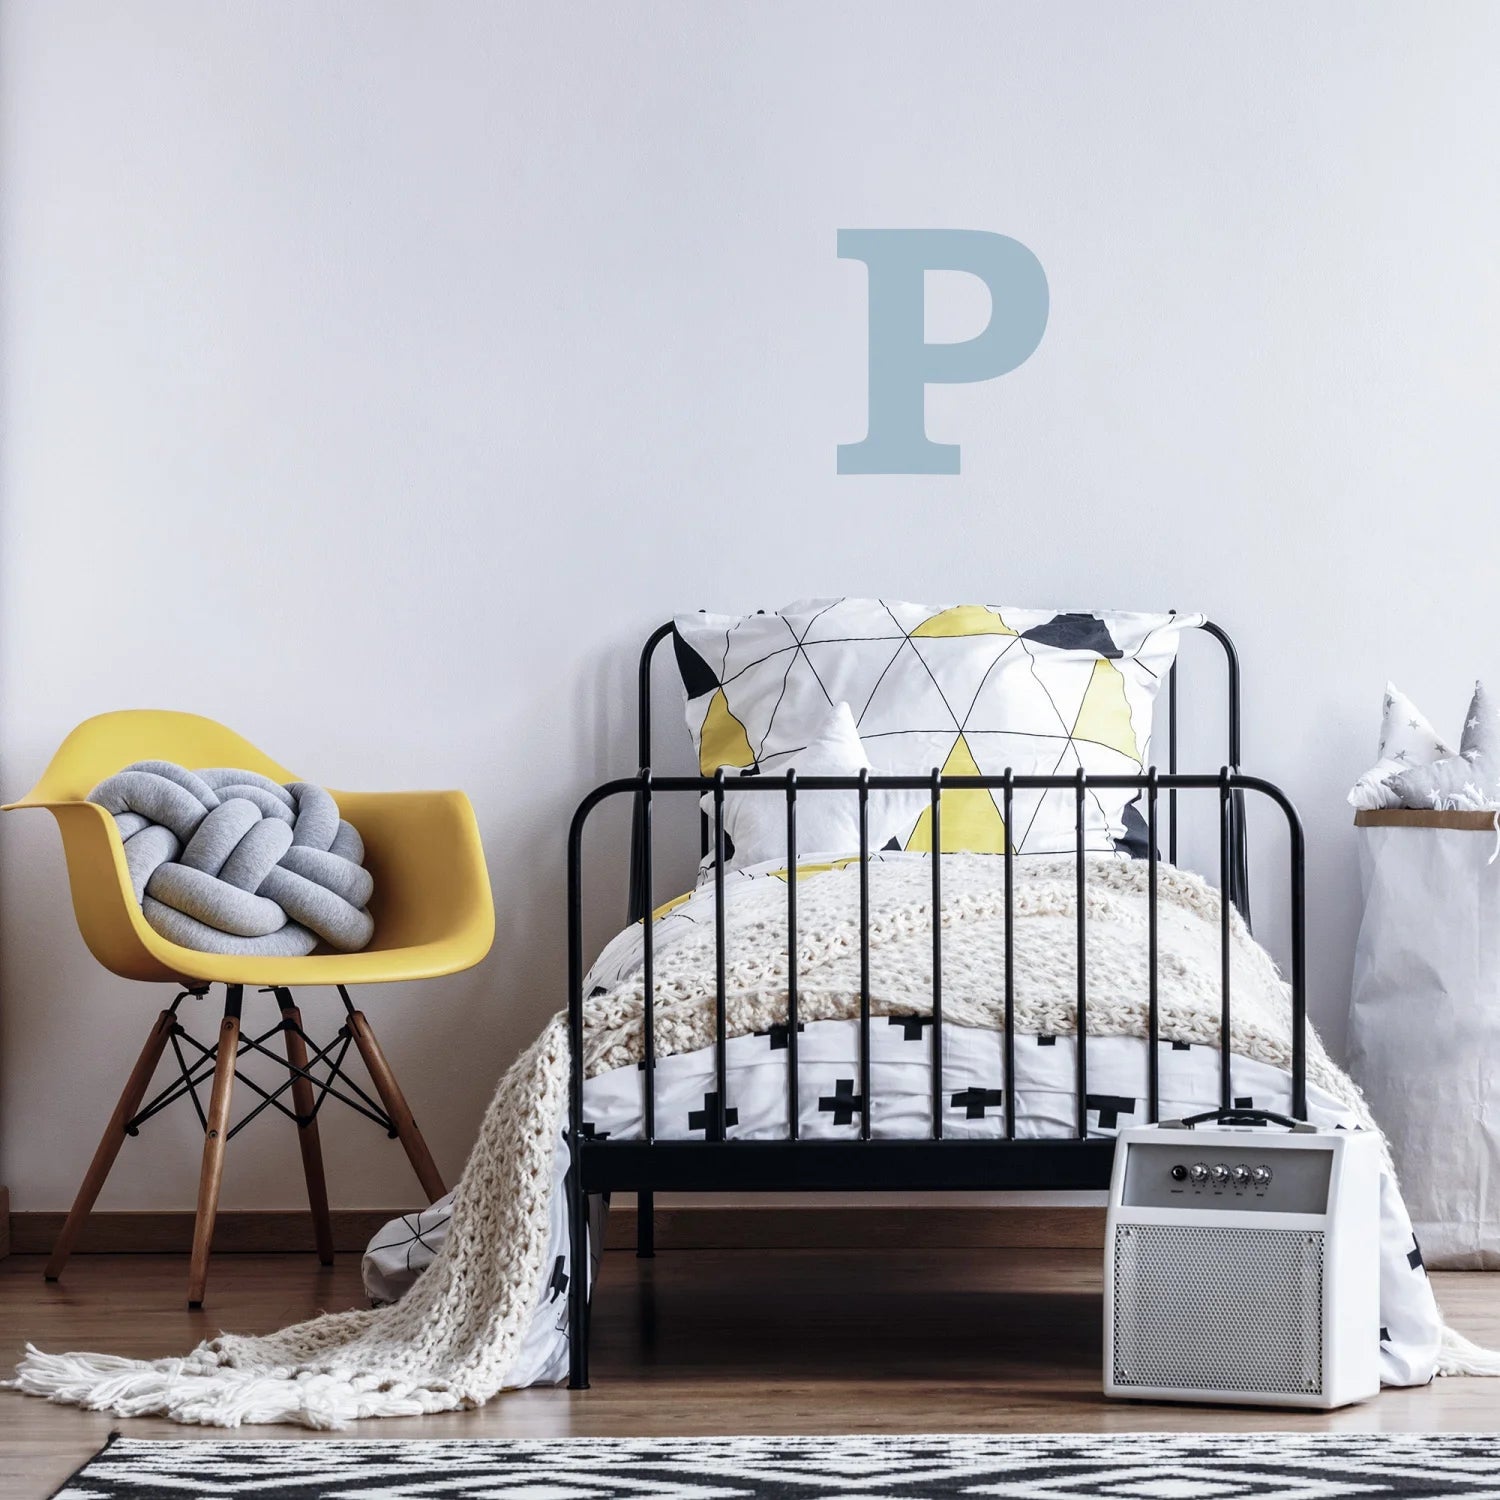 Letter P Initial Decal - Decals - Initials